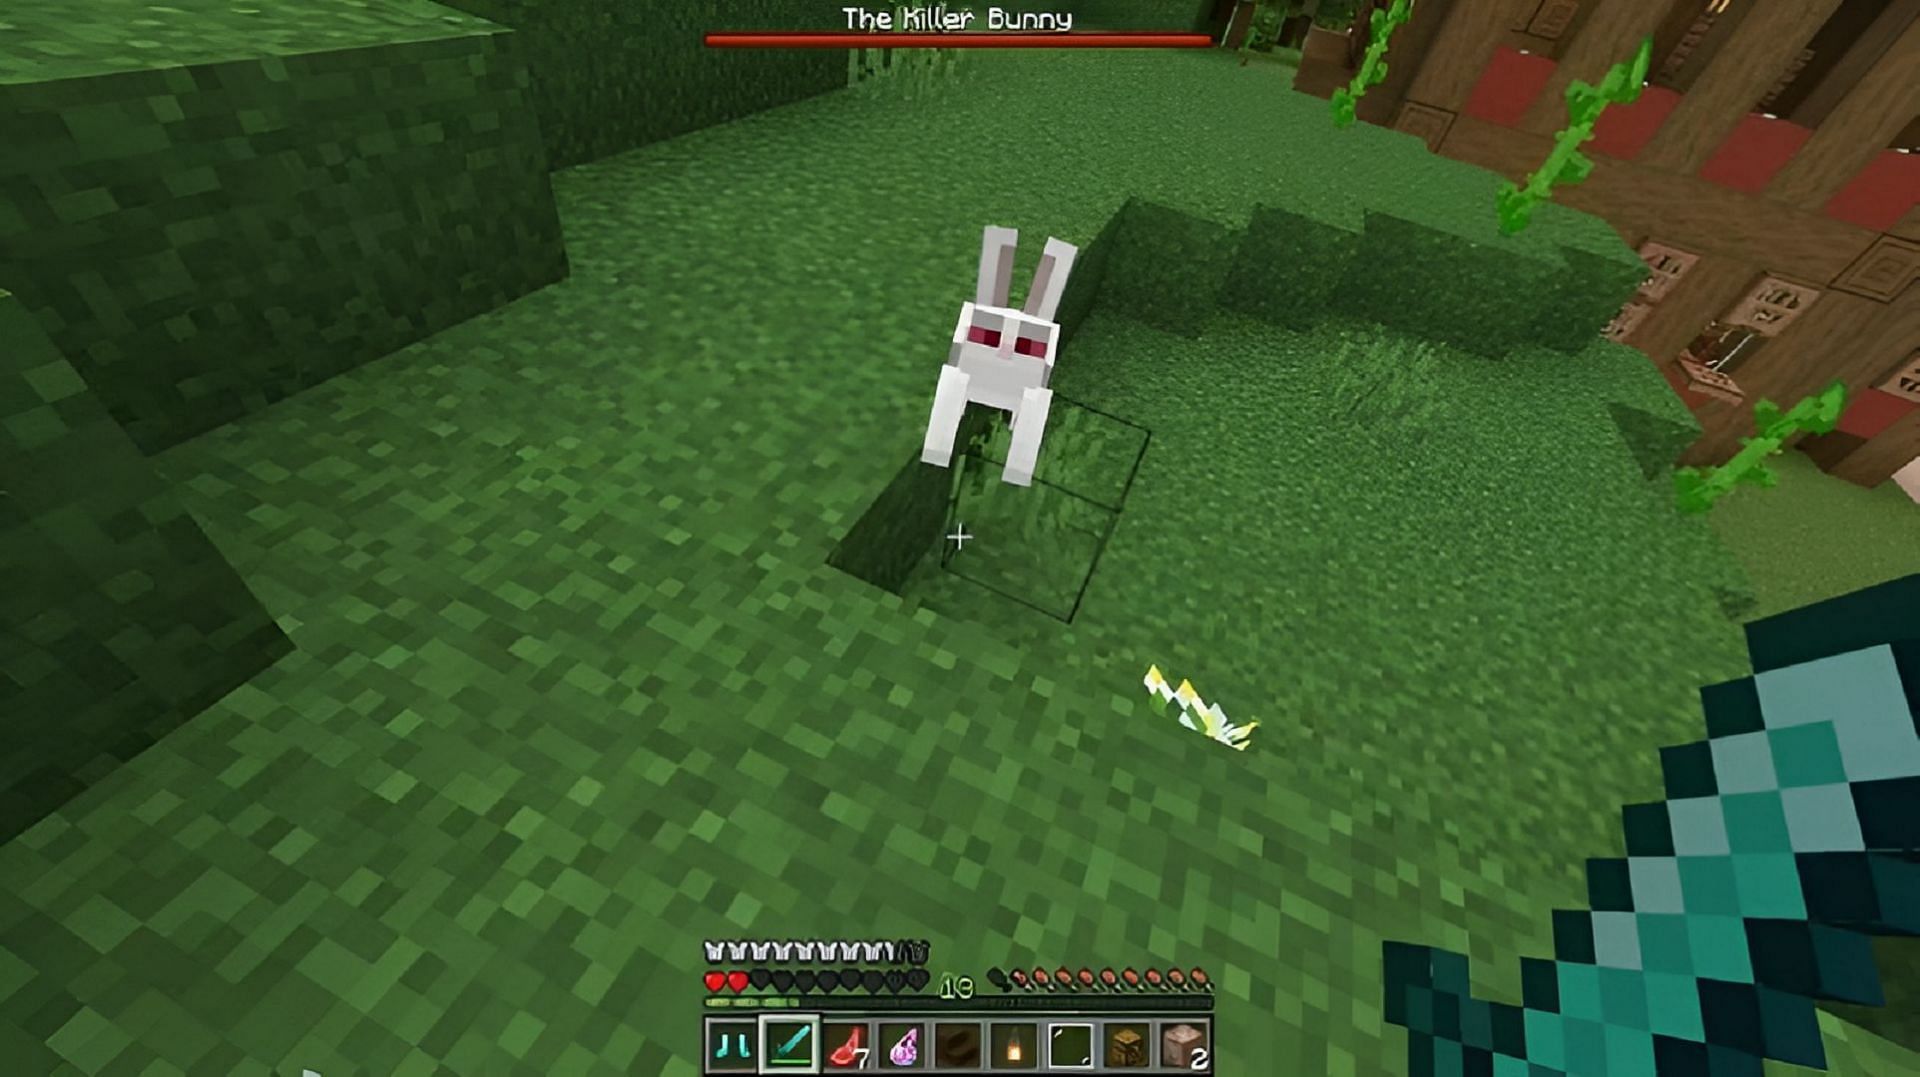 The killer bunny can cause quite a scare for players not expecting it (Image via Mojang)